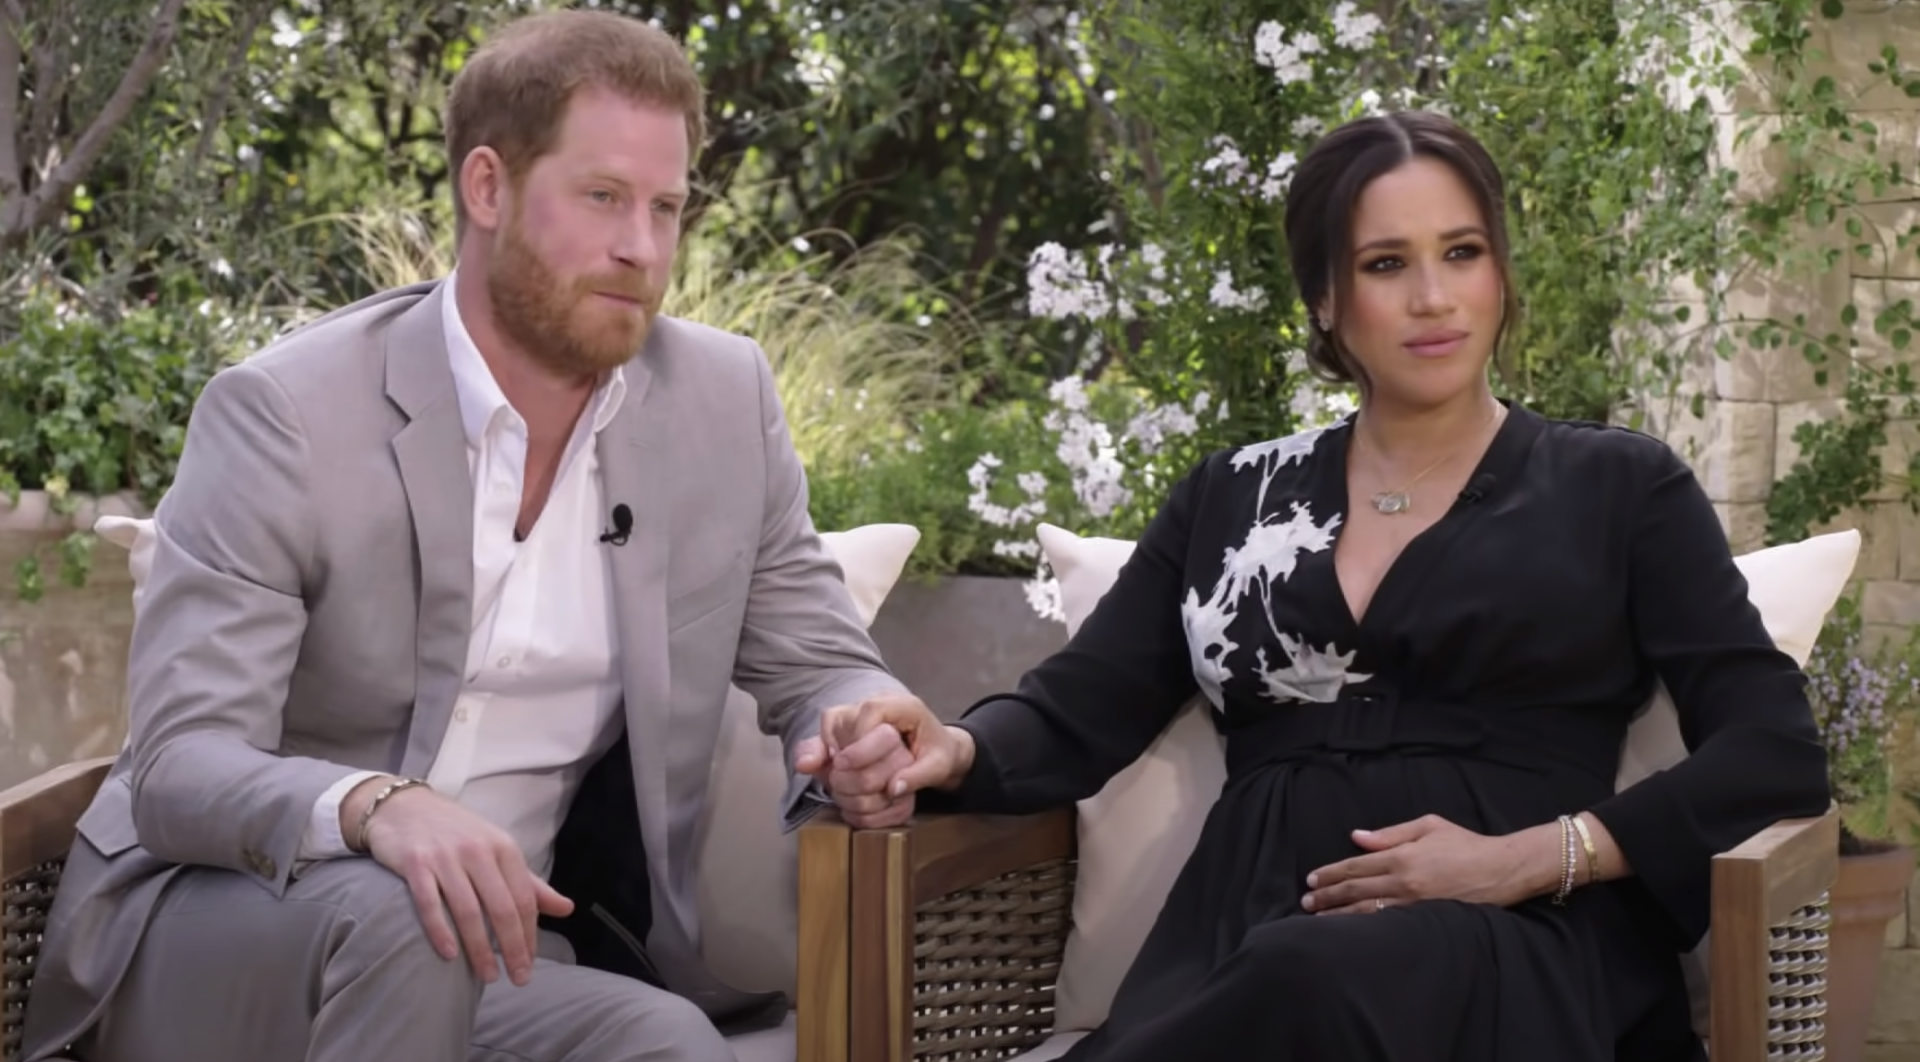 The Meghan Markle Interview With Oprah Reportedly Worth CBS Over $7 Million